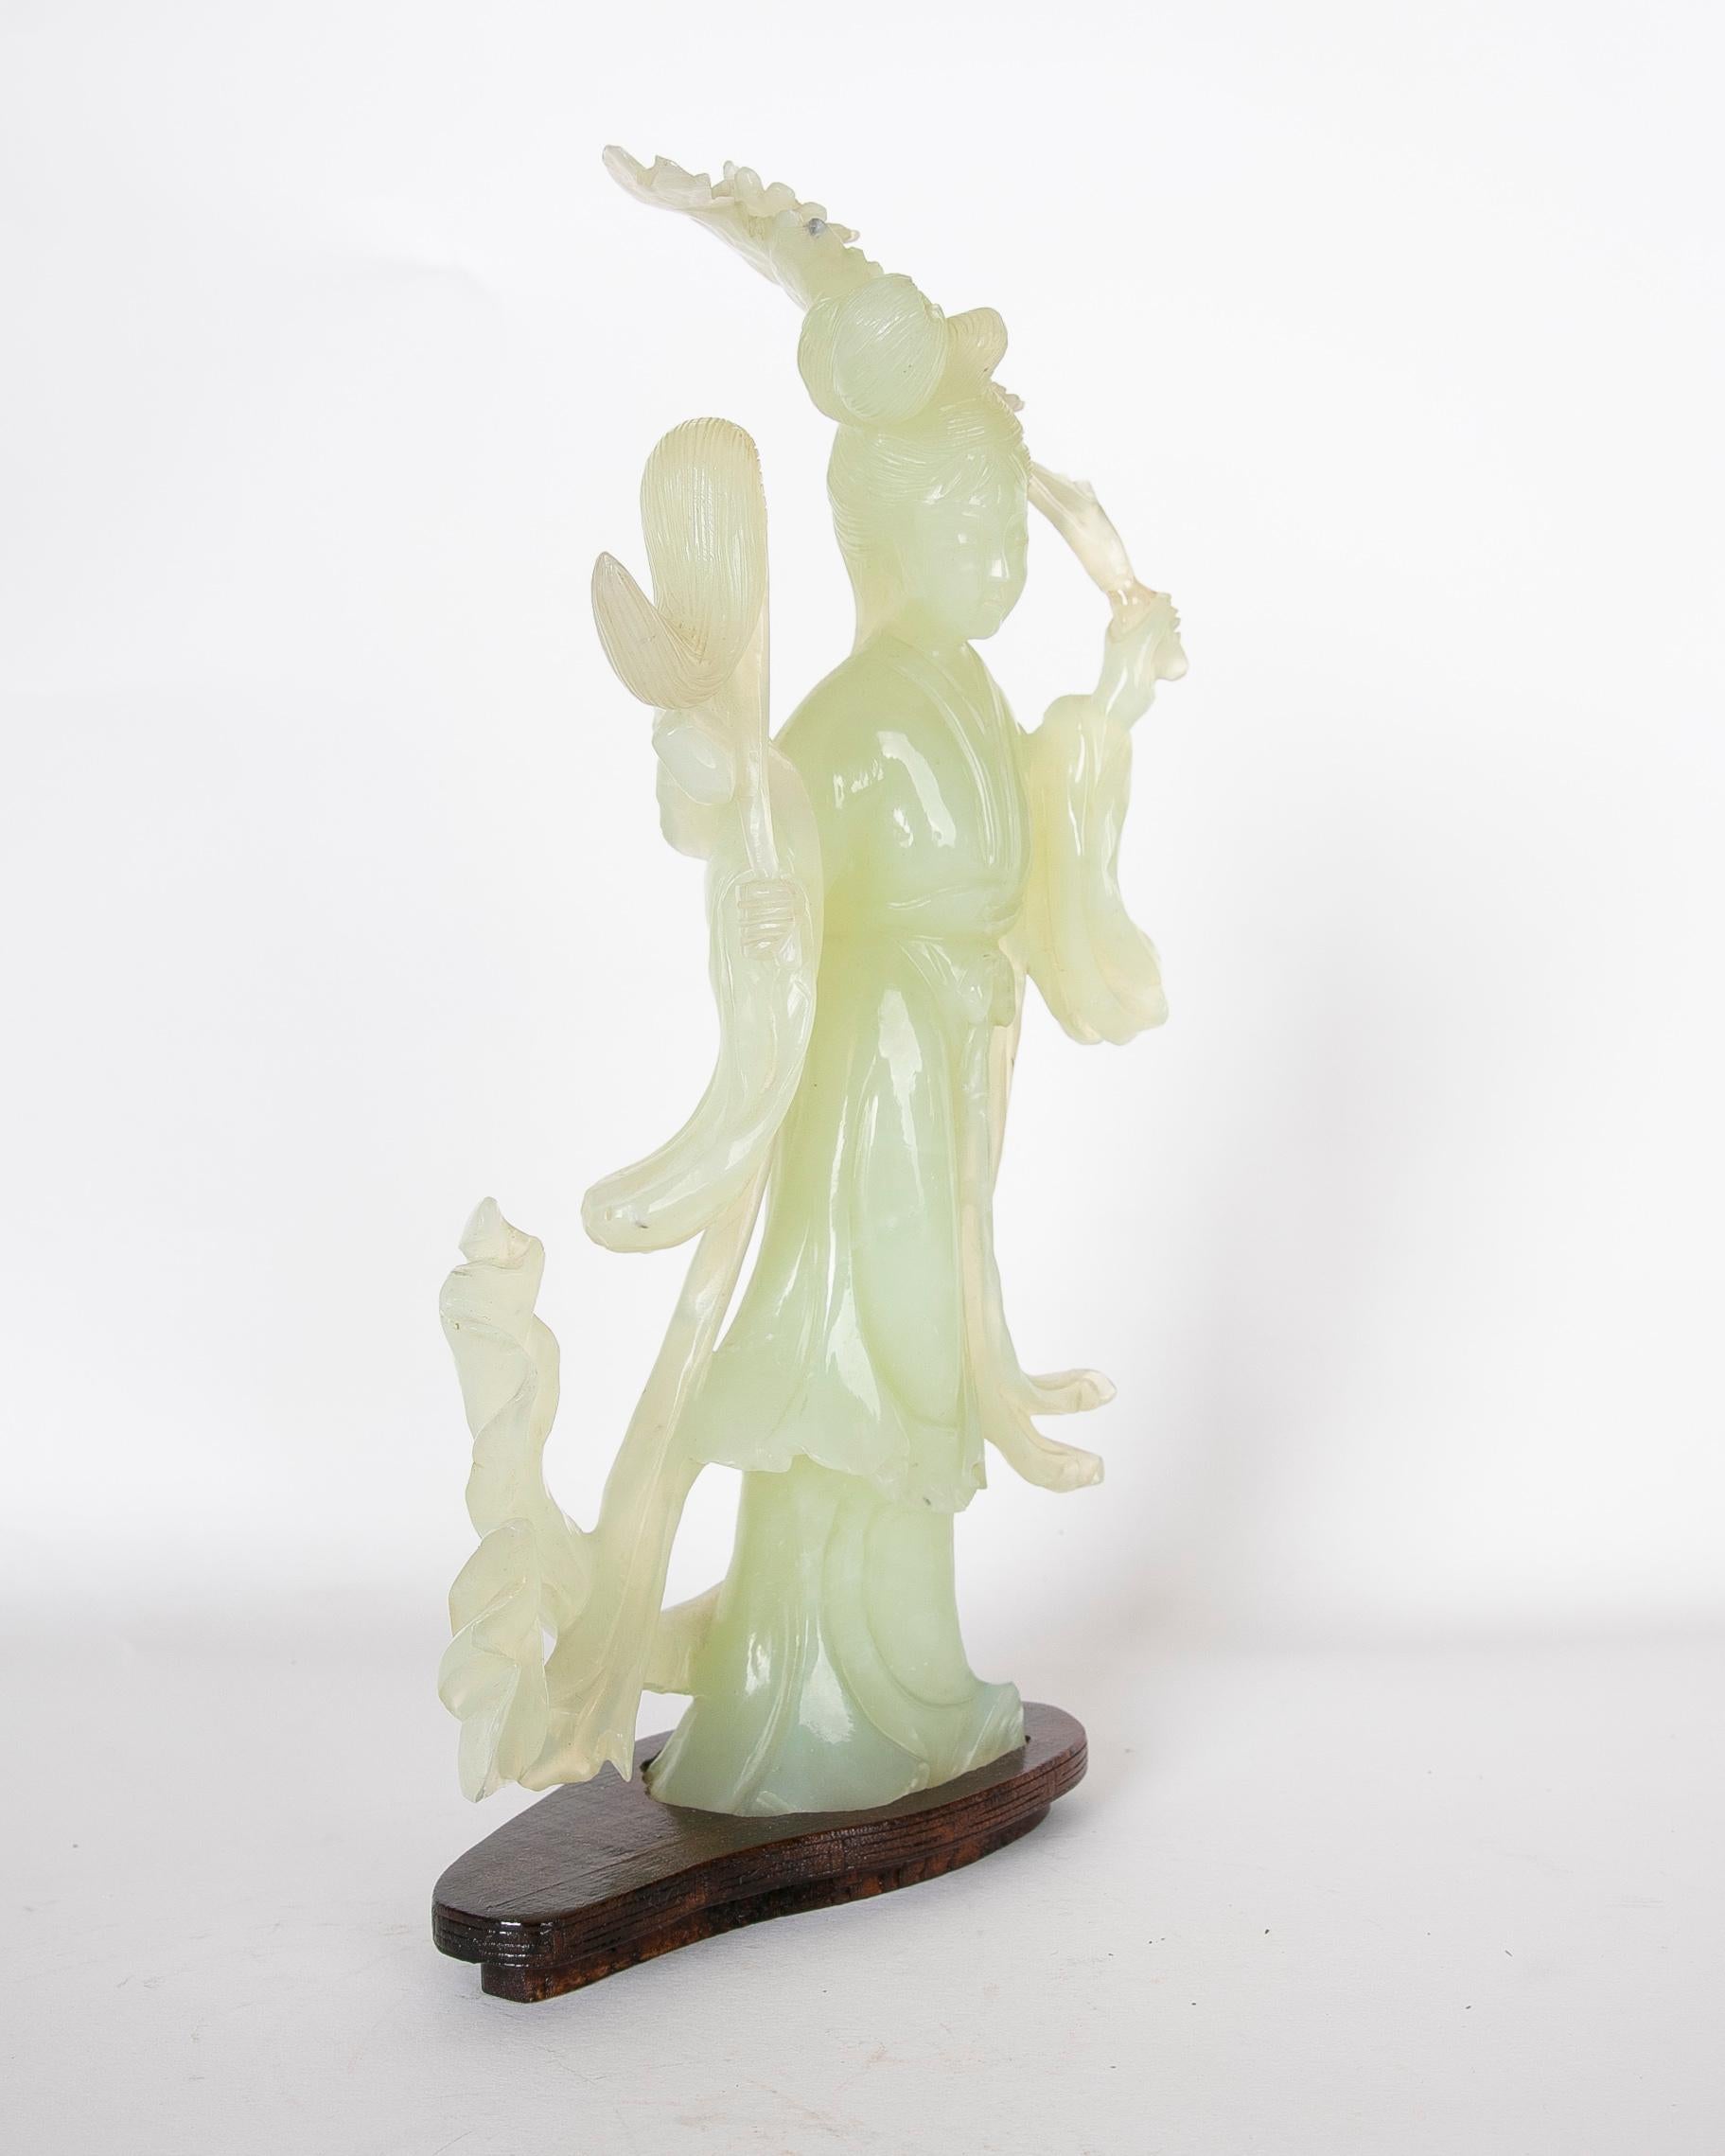 Hand-Carved Jadeite Figurine of an Oriental Woman on a Wooden Base For Sale 1